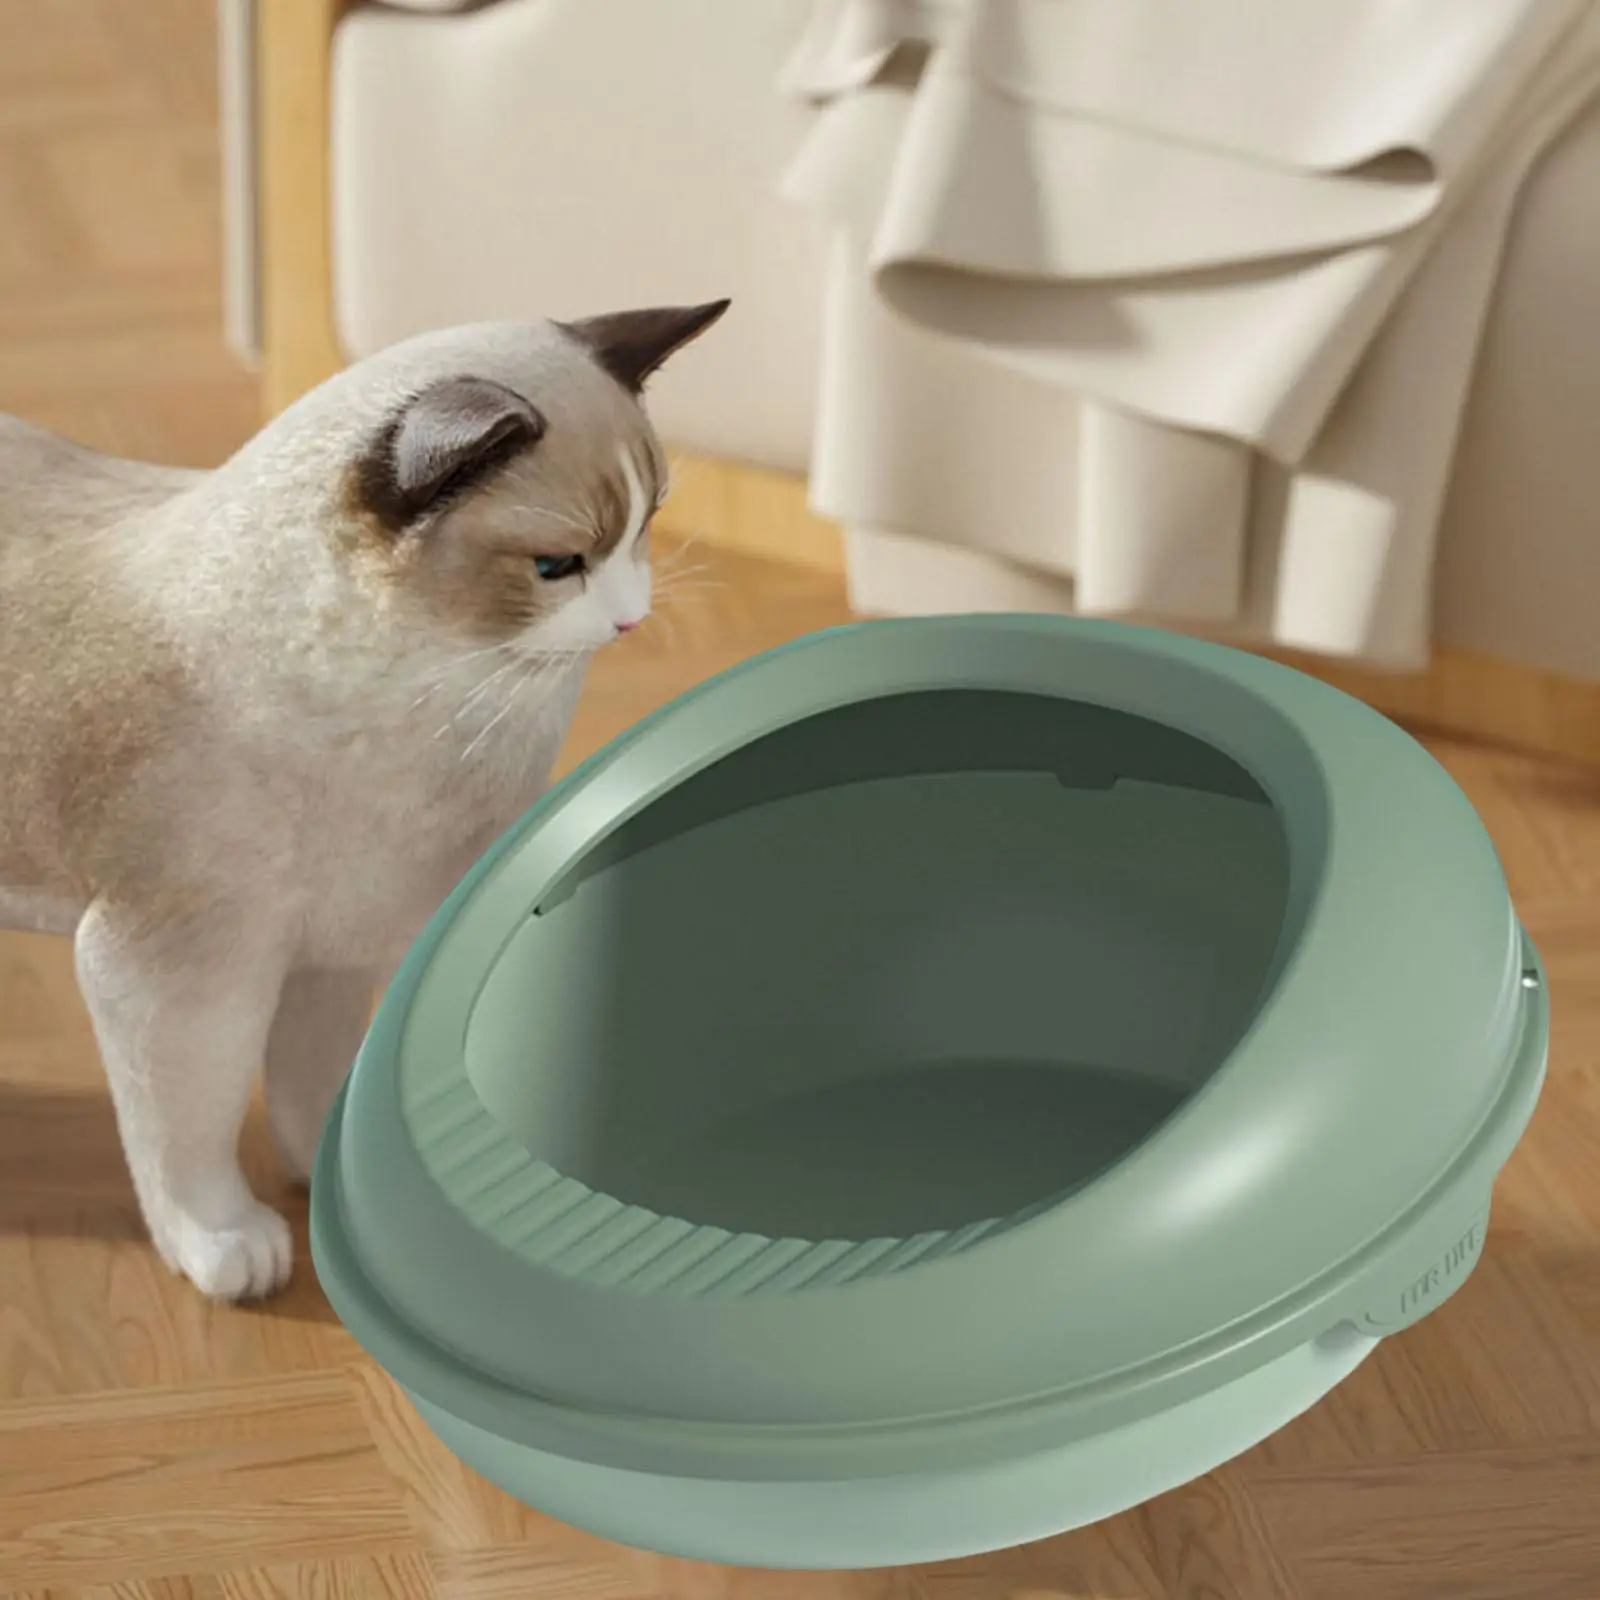 Splashing Cat Litter Box Tray Easy Cleaning High Sided Rim for Sand Box Supplies